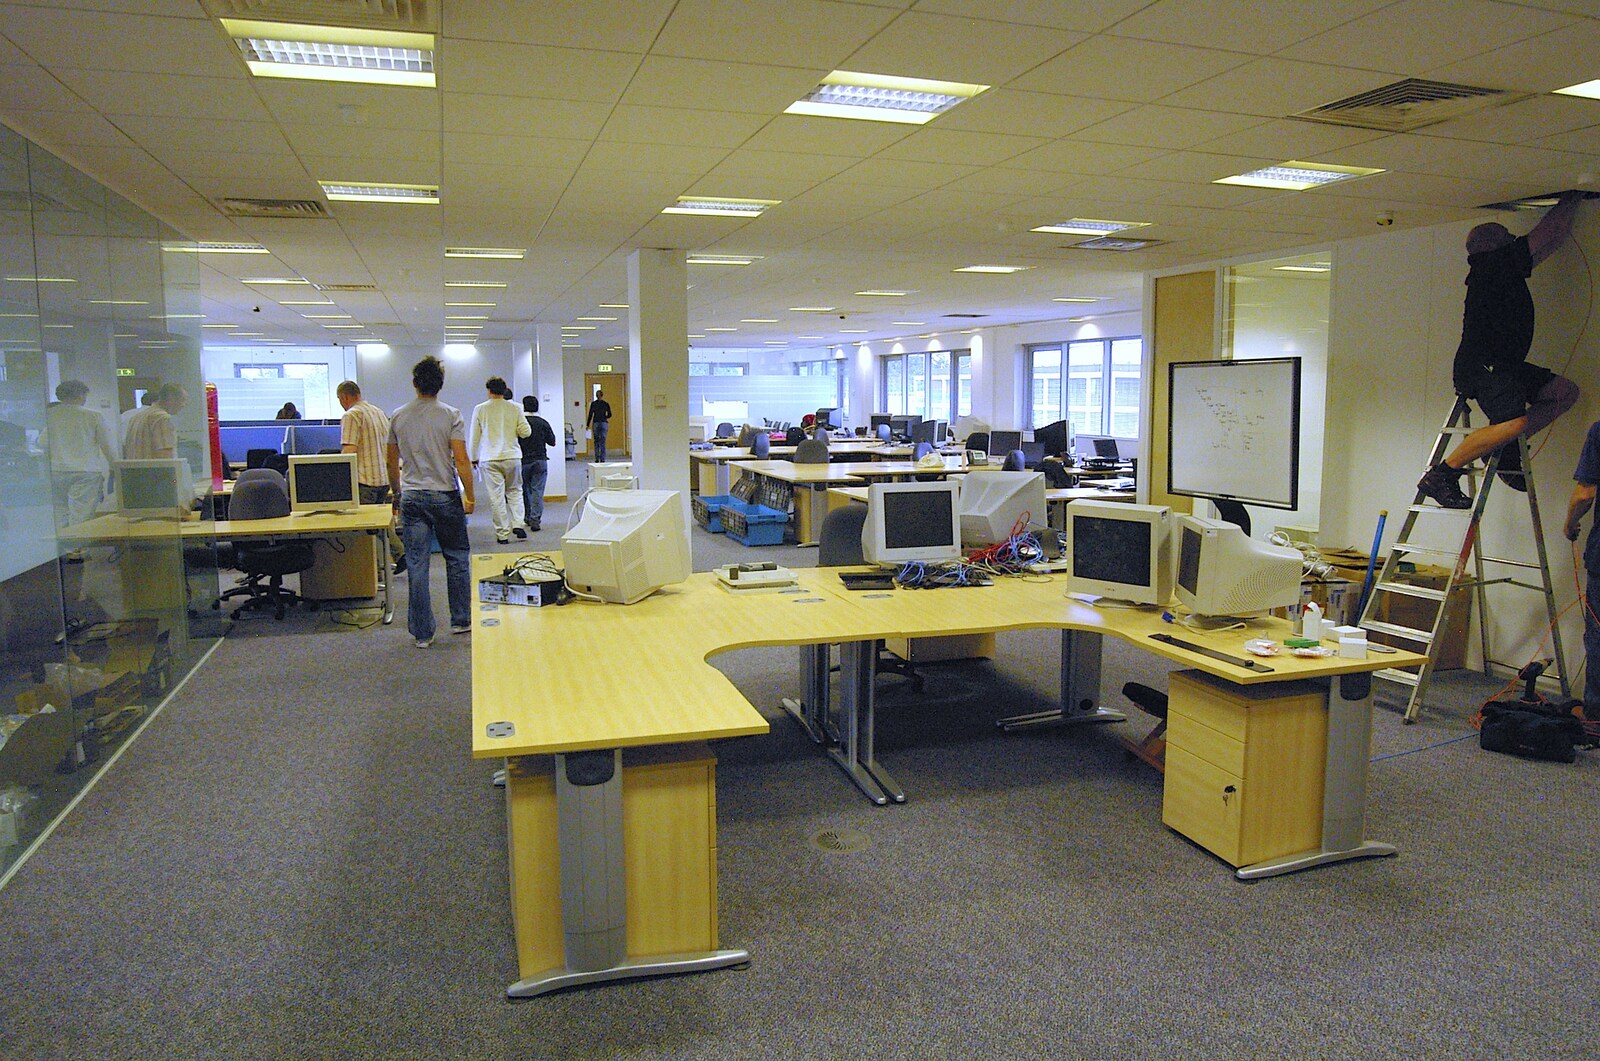 The new engineering area from Qualcomm Moves Offices, Milton Road, Cambridge - 26th July 2006